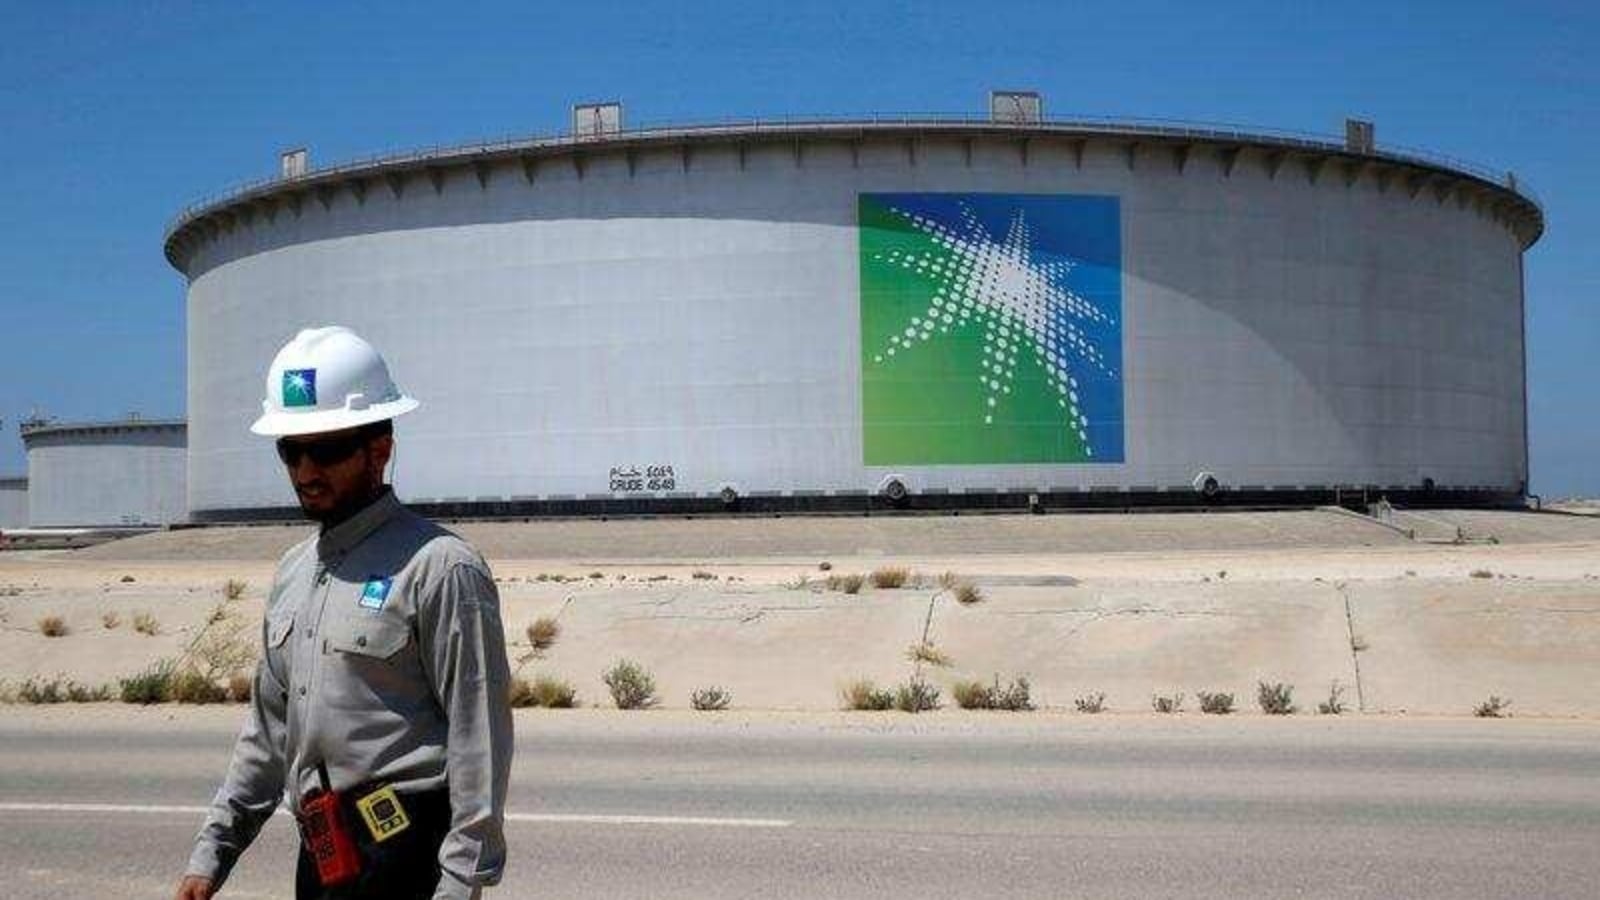 Saudi Aramco’s Luberef expects to raise up to $1.32 bn from IPO